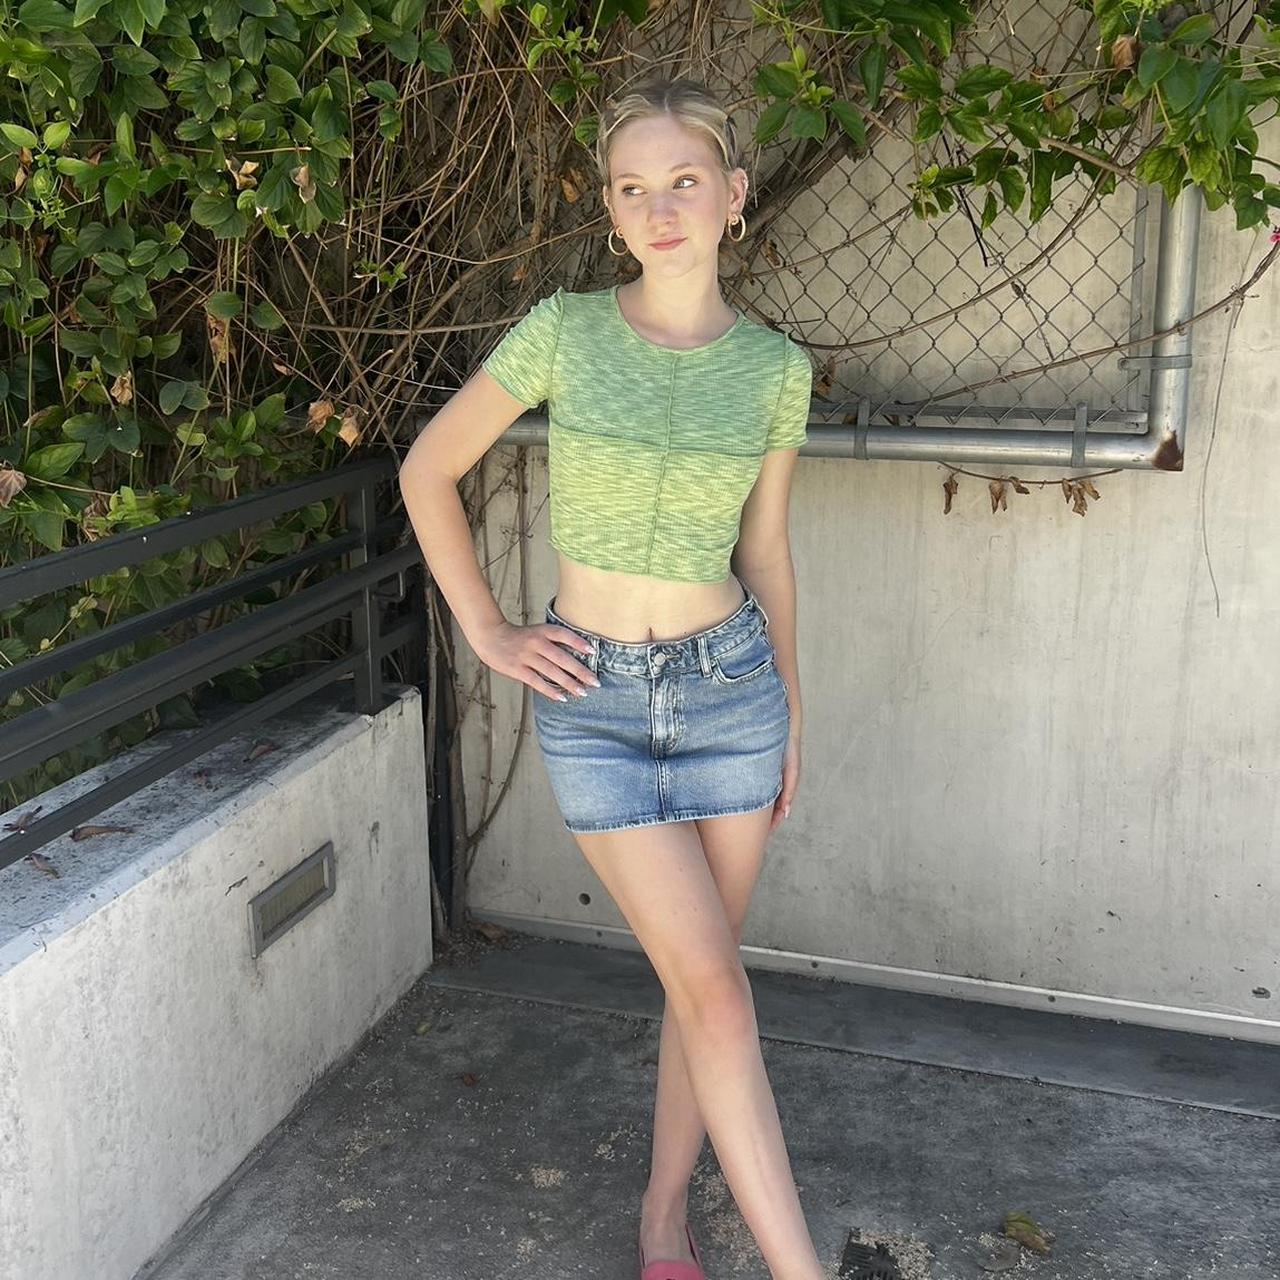 Green Trendy Crop worn by Lily Brooks O’Briant - Depop